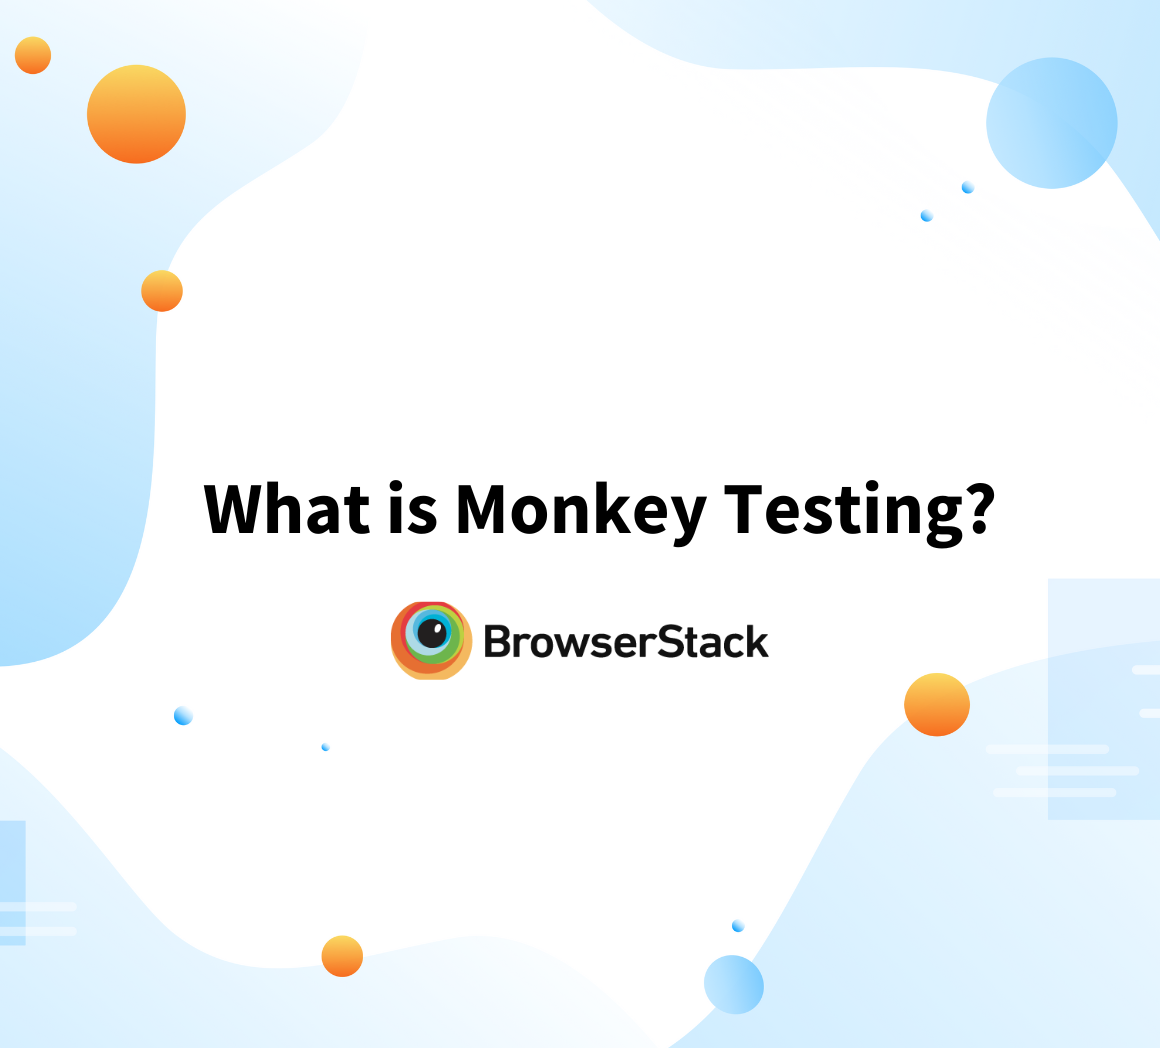 What is Monkey Testting?